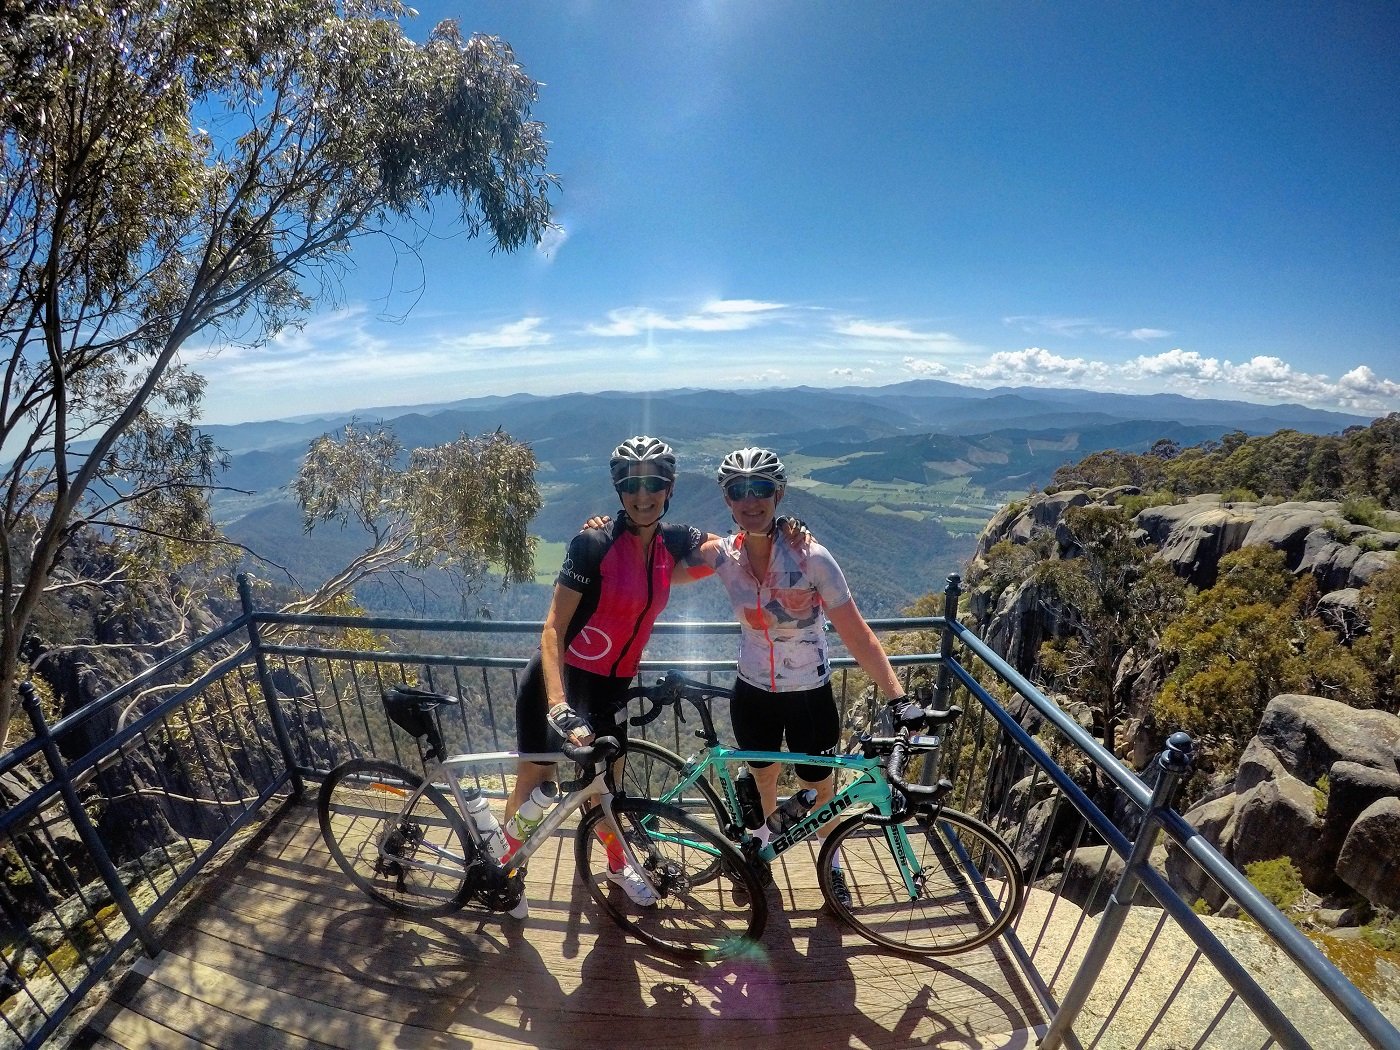 Pic of Michelle and Kerry at an overlook in the mountains with their bikes